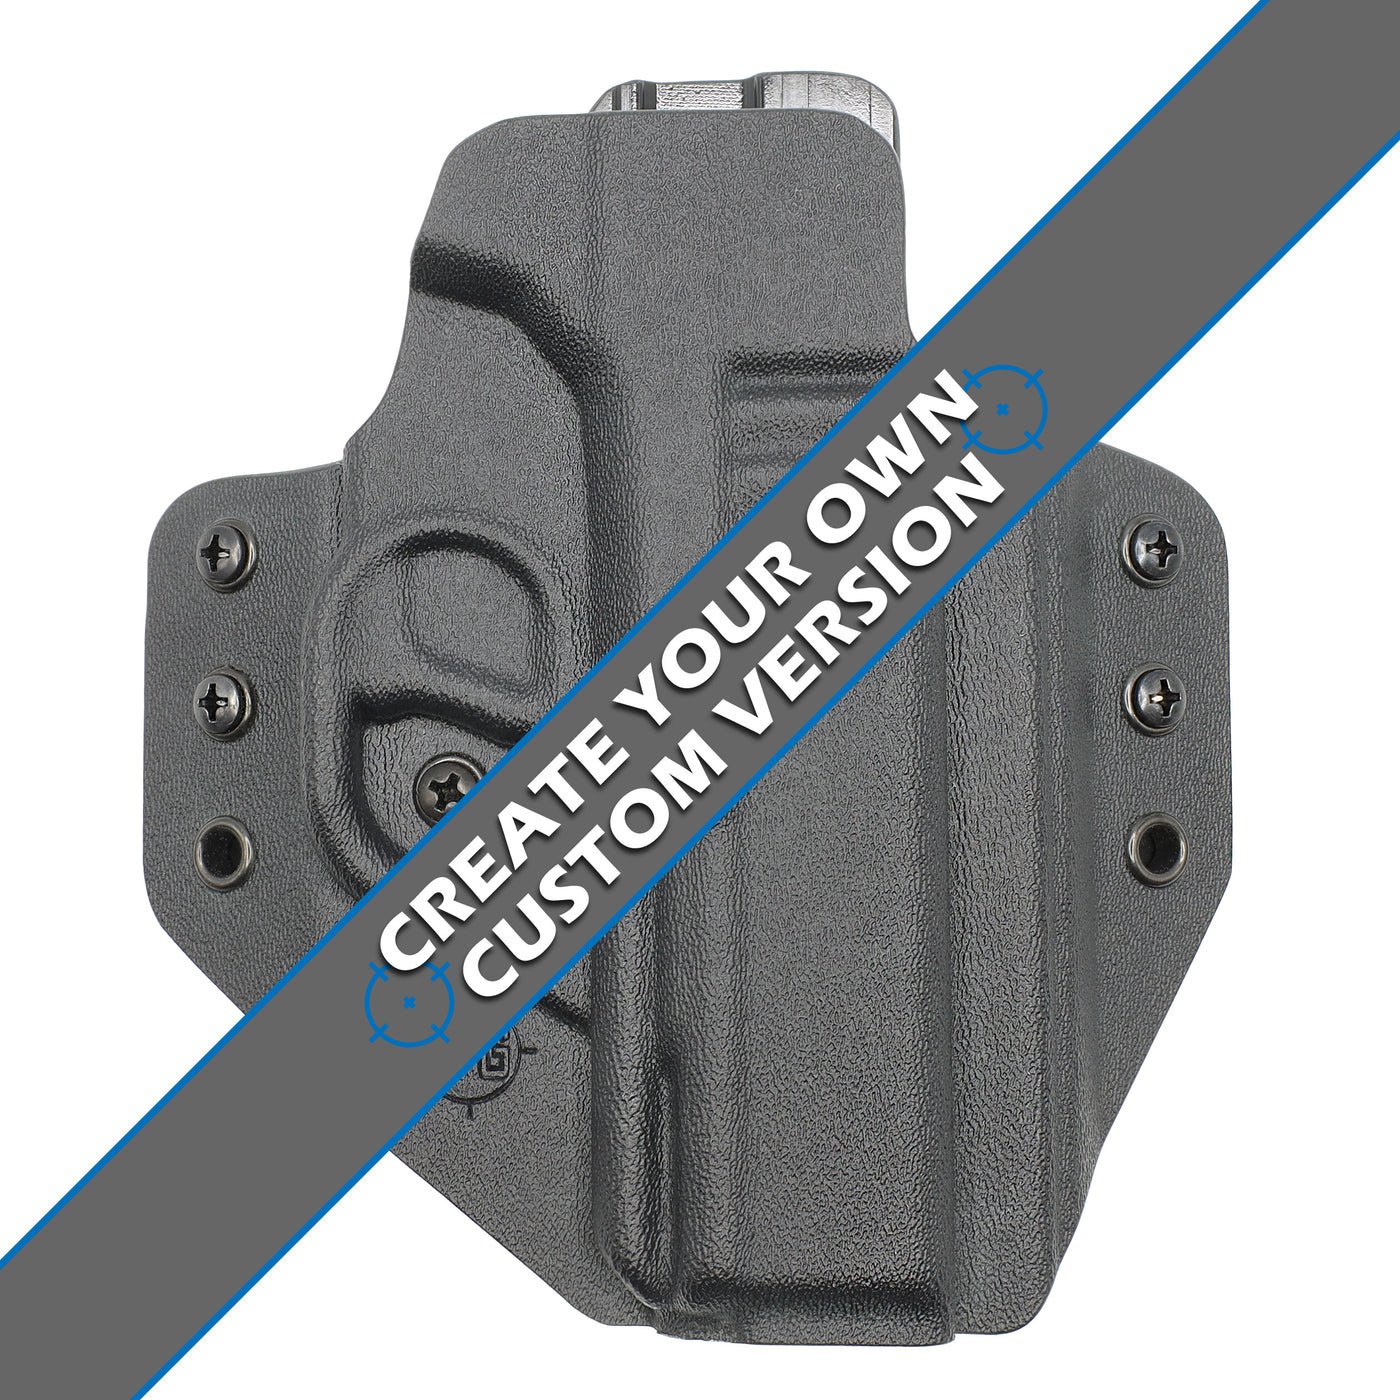 C&G Holsters Custom OWB Covert Shadow Systems DR920